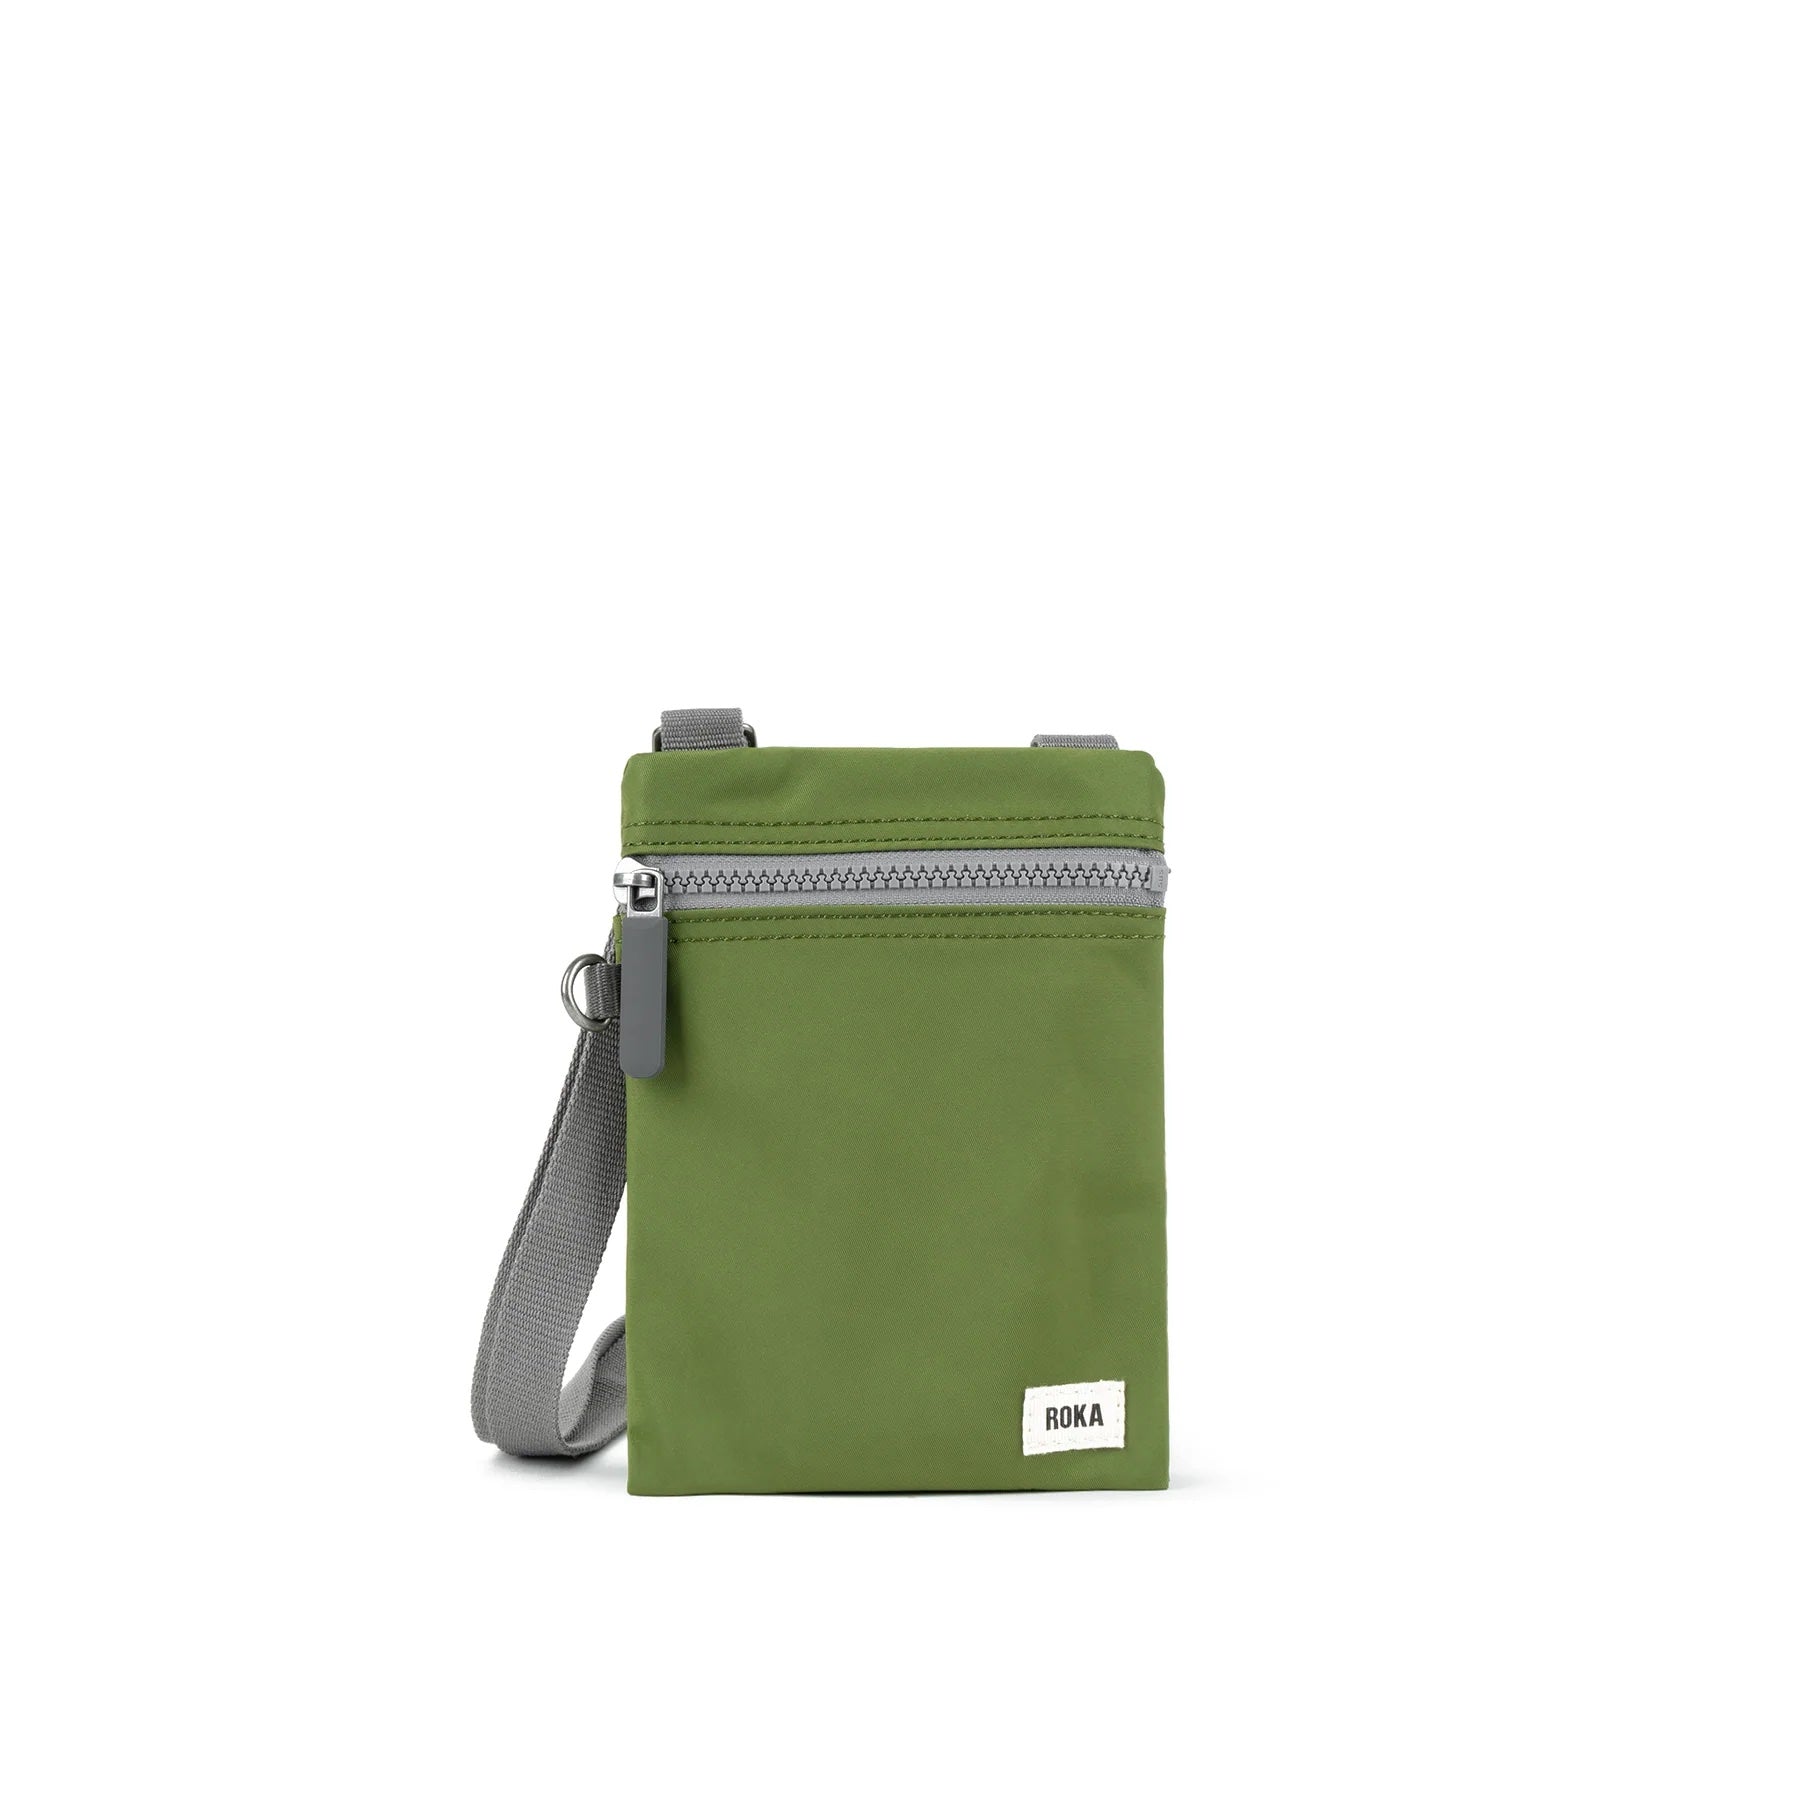 A photo of the front of a small rectangular avocado green pocket bag. It has a grey zip horizontally at the top, grey straps, and a small ROKA logo in the bottom right corner.